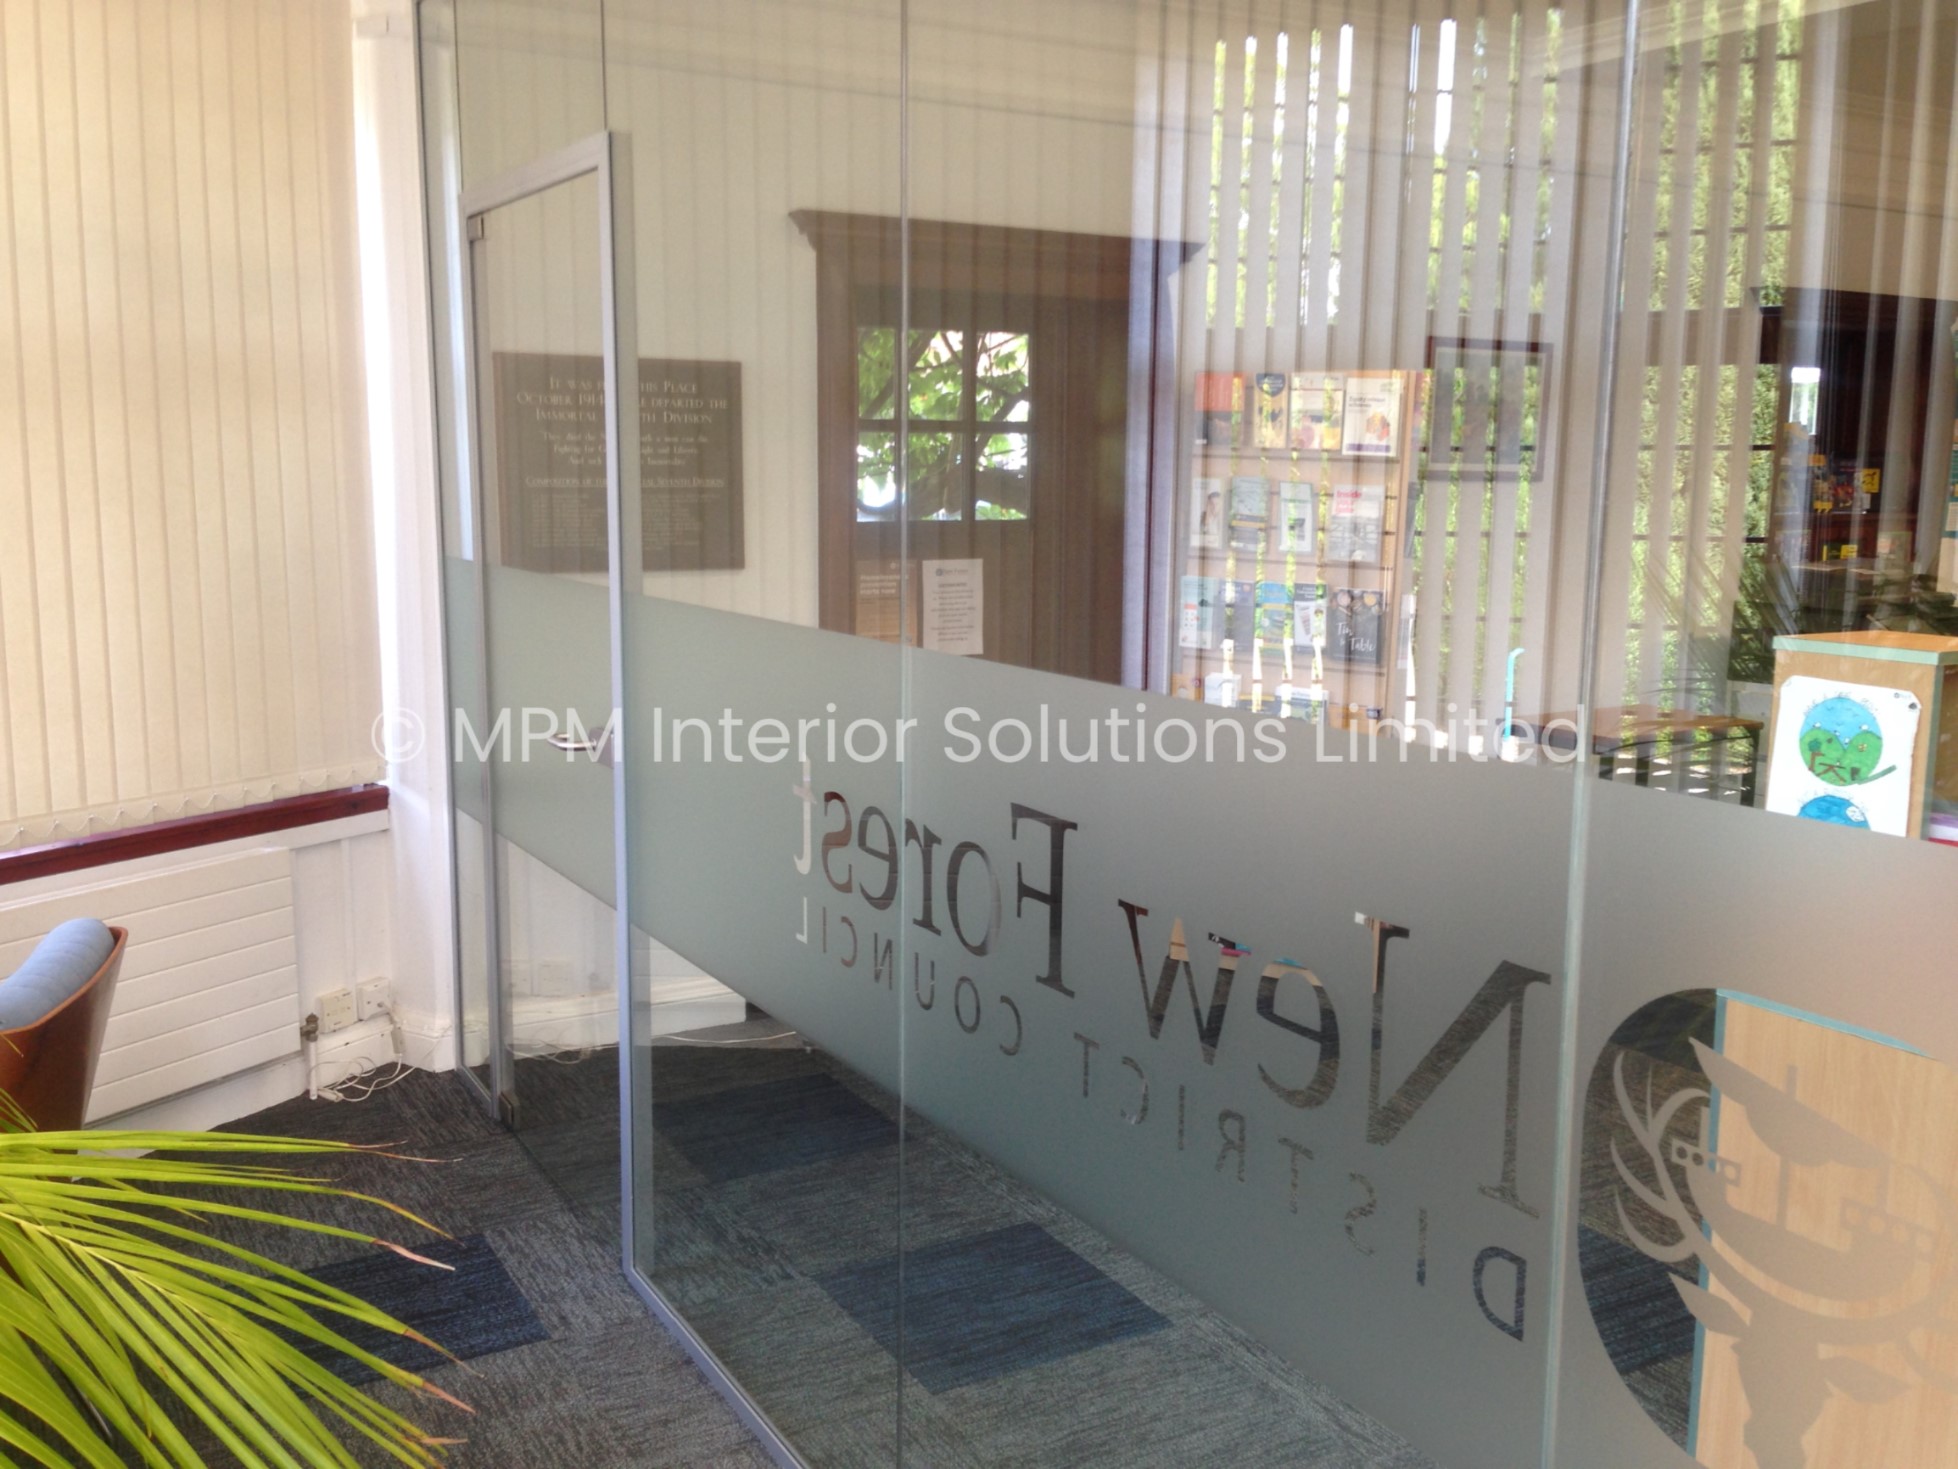 Frameless Glass Office Partitioning, New Forest District Council (Lyndhurst, Hampshire), MPM Interior Solutions Limited